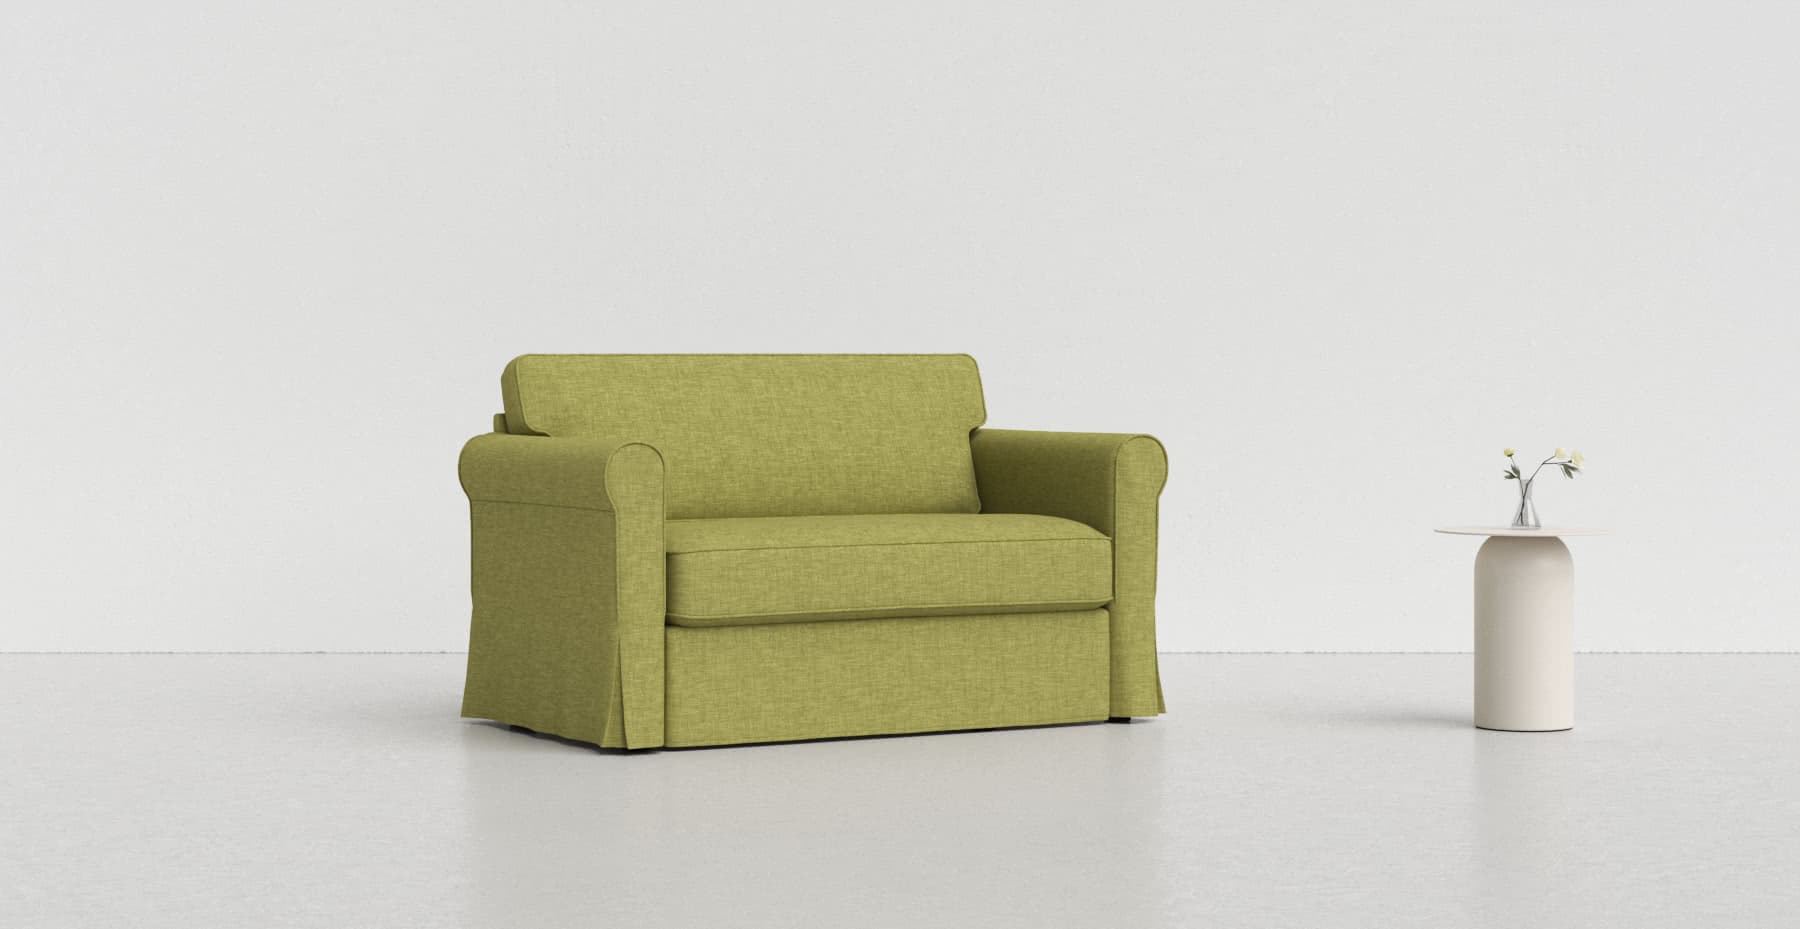 A lime green Hagalund sofa on a lighter grey background with a white vase beside it